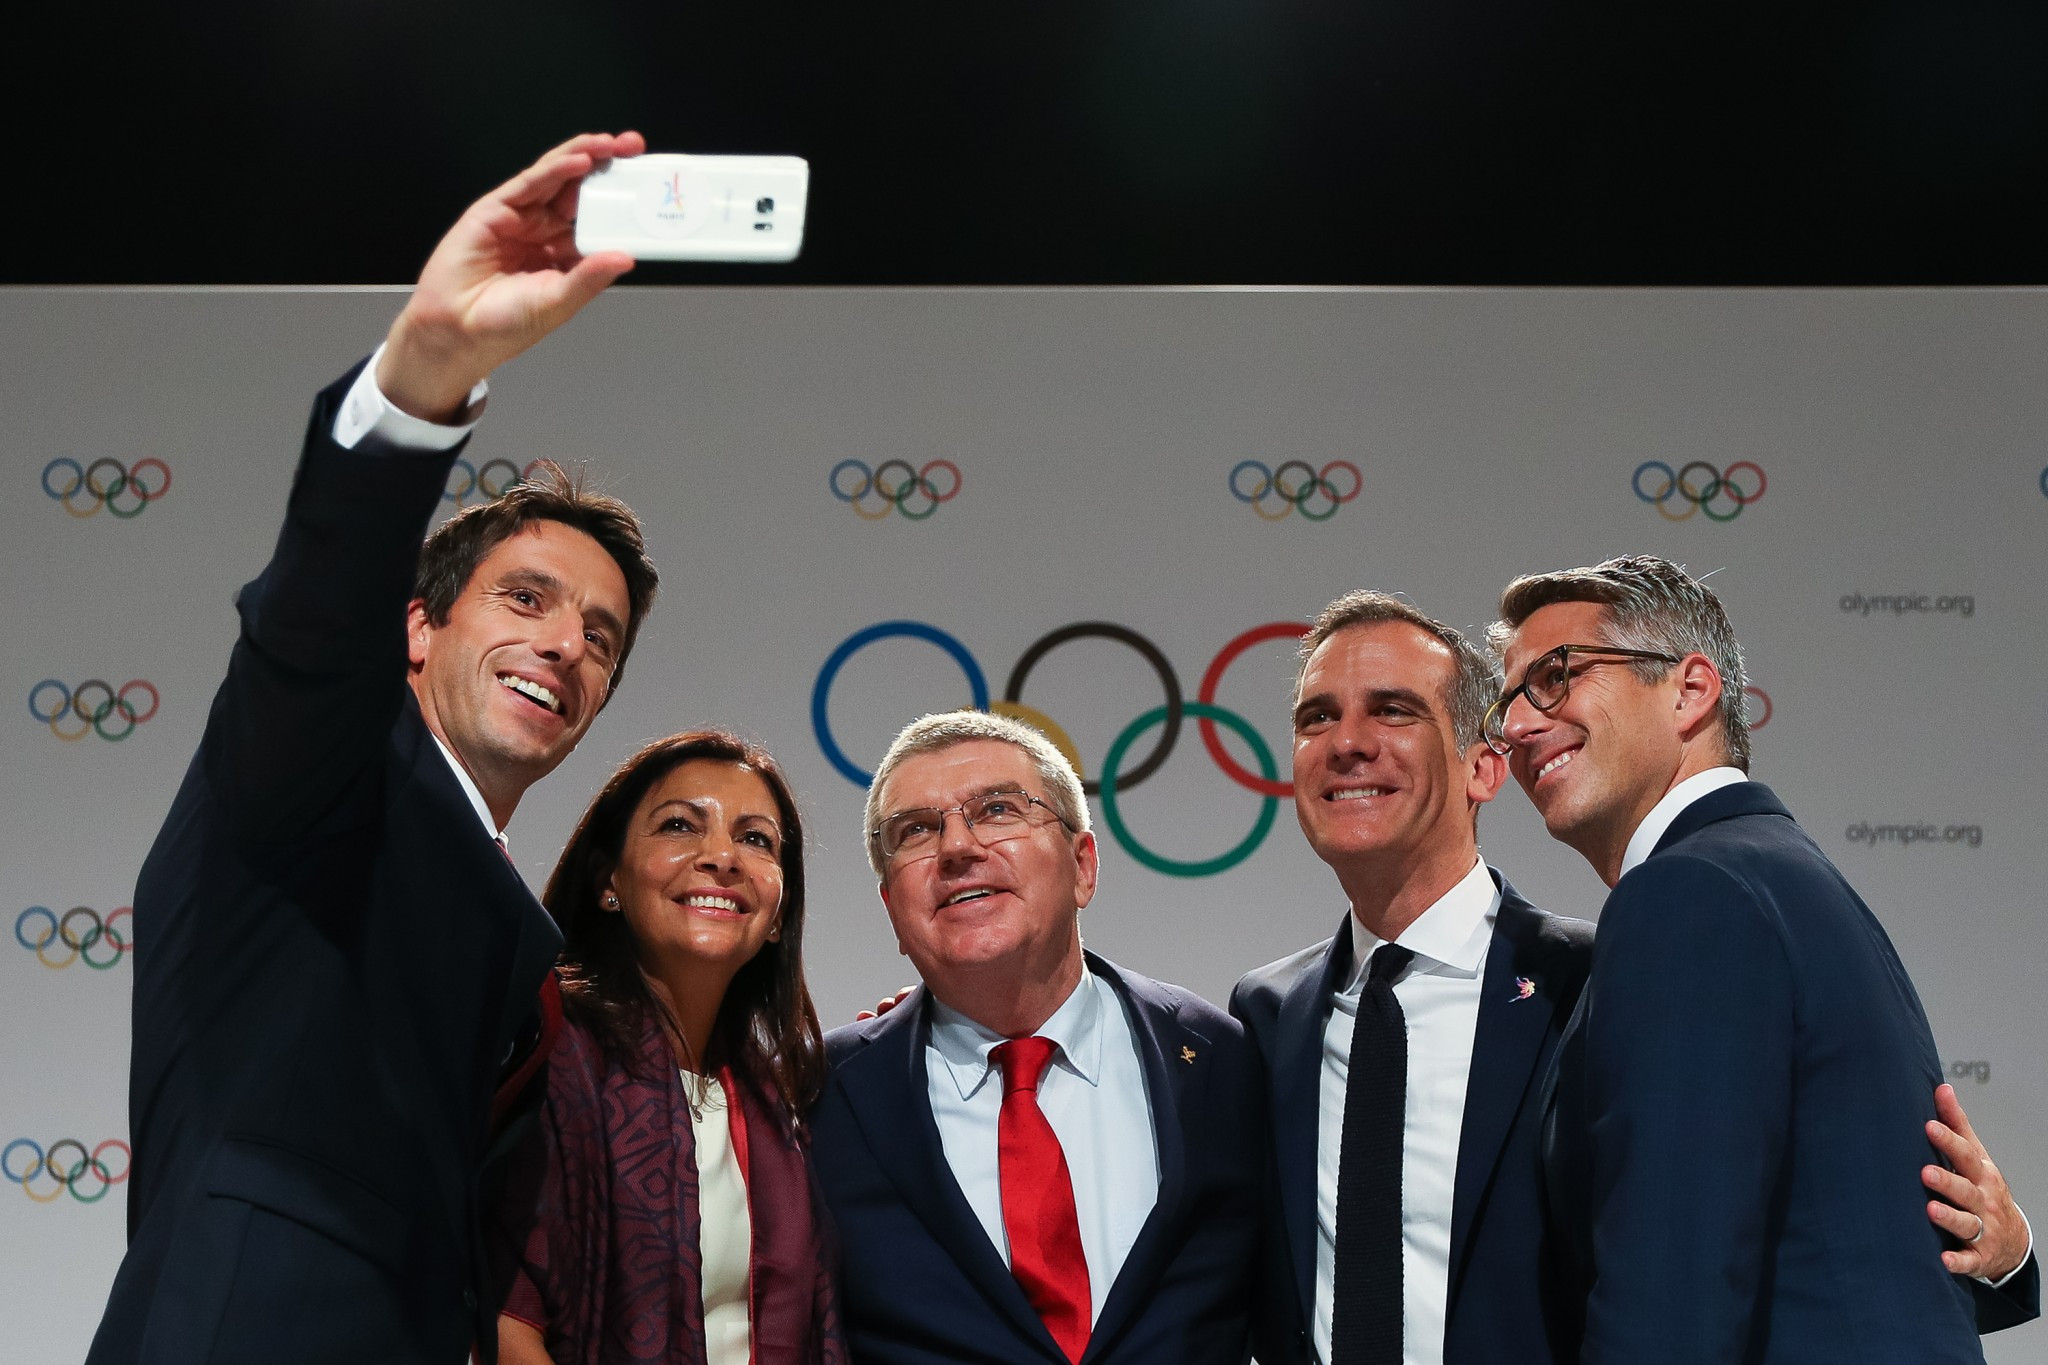 IOC President Thomas Bach hailed the agreement as a win-win-win ©Getty Images